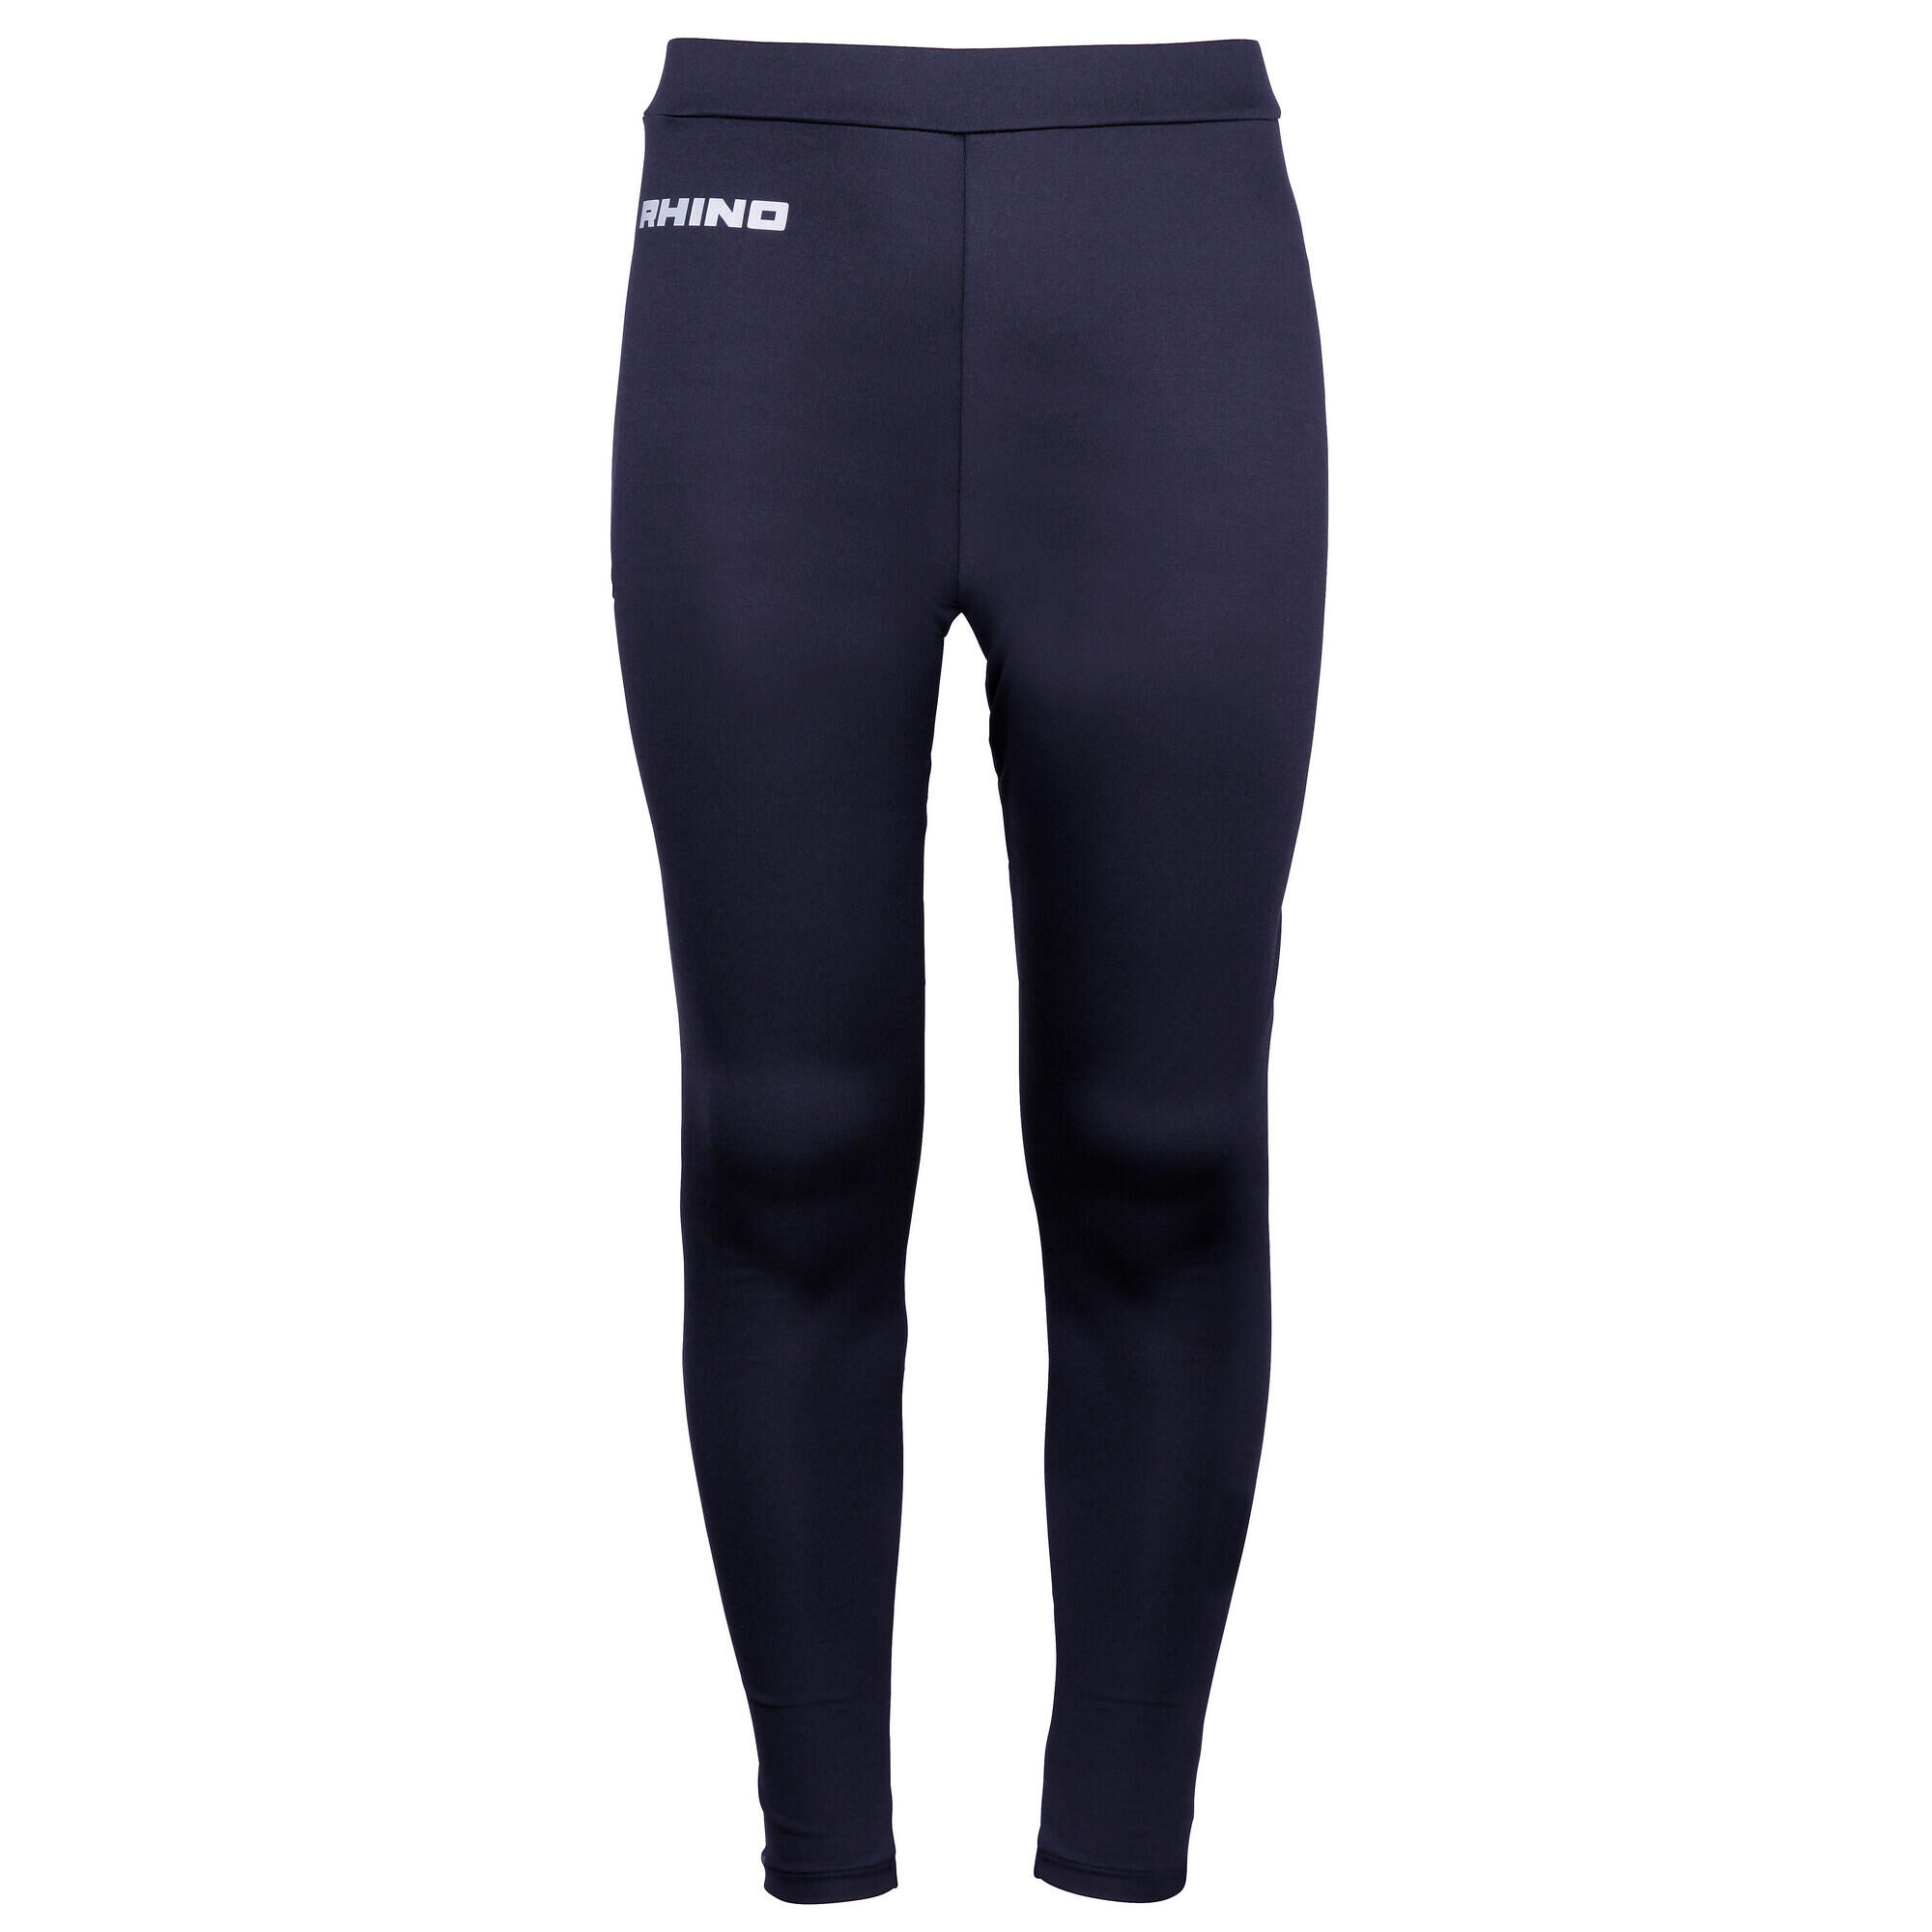 BOYS BLUE THERMAL Leggings And Top Age 6-8 years from lidl £9.00 - PicClick  UK